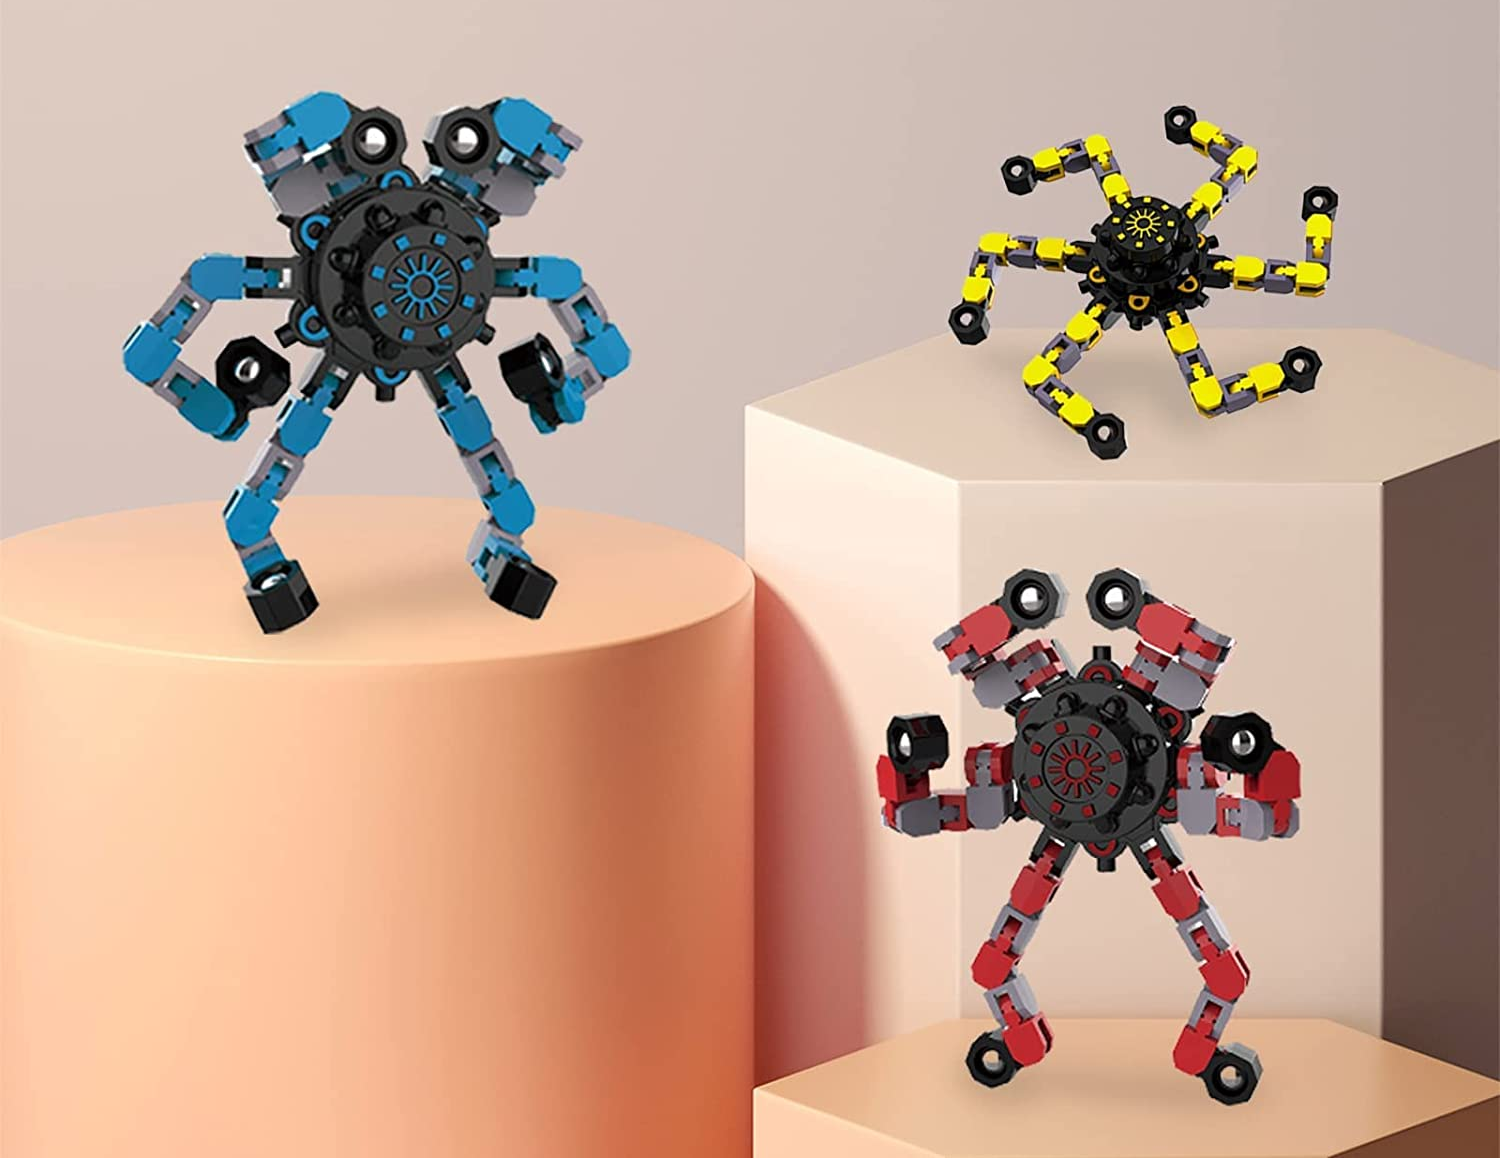 Three different fidget robot toys in blue, red, and yellow